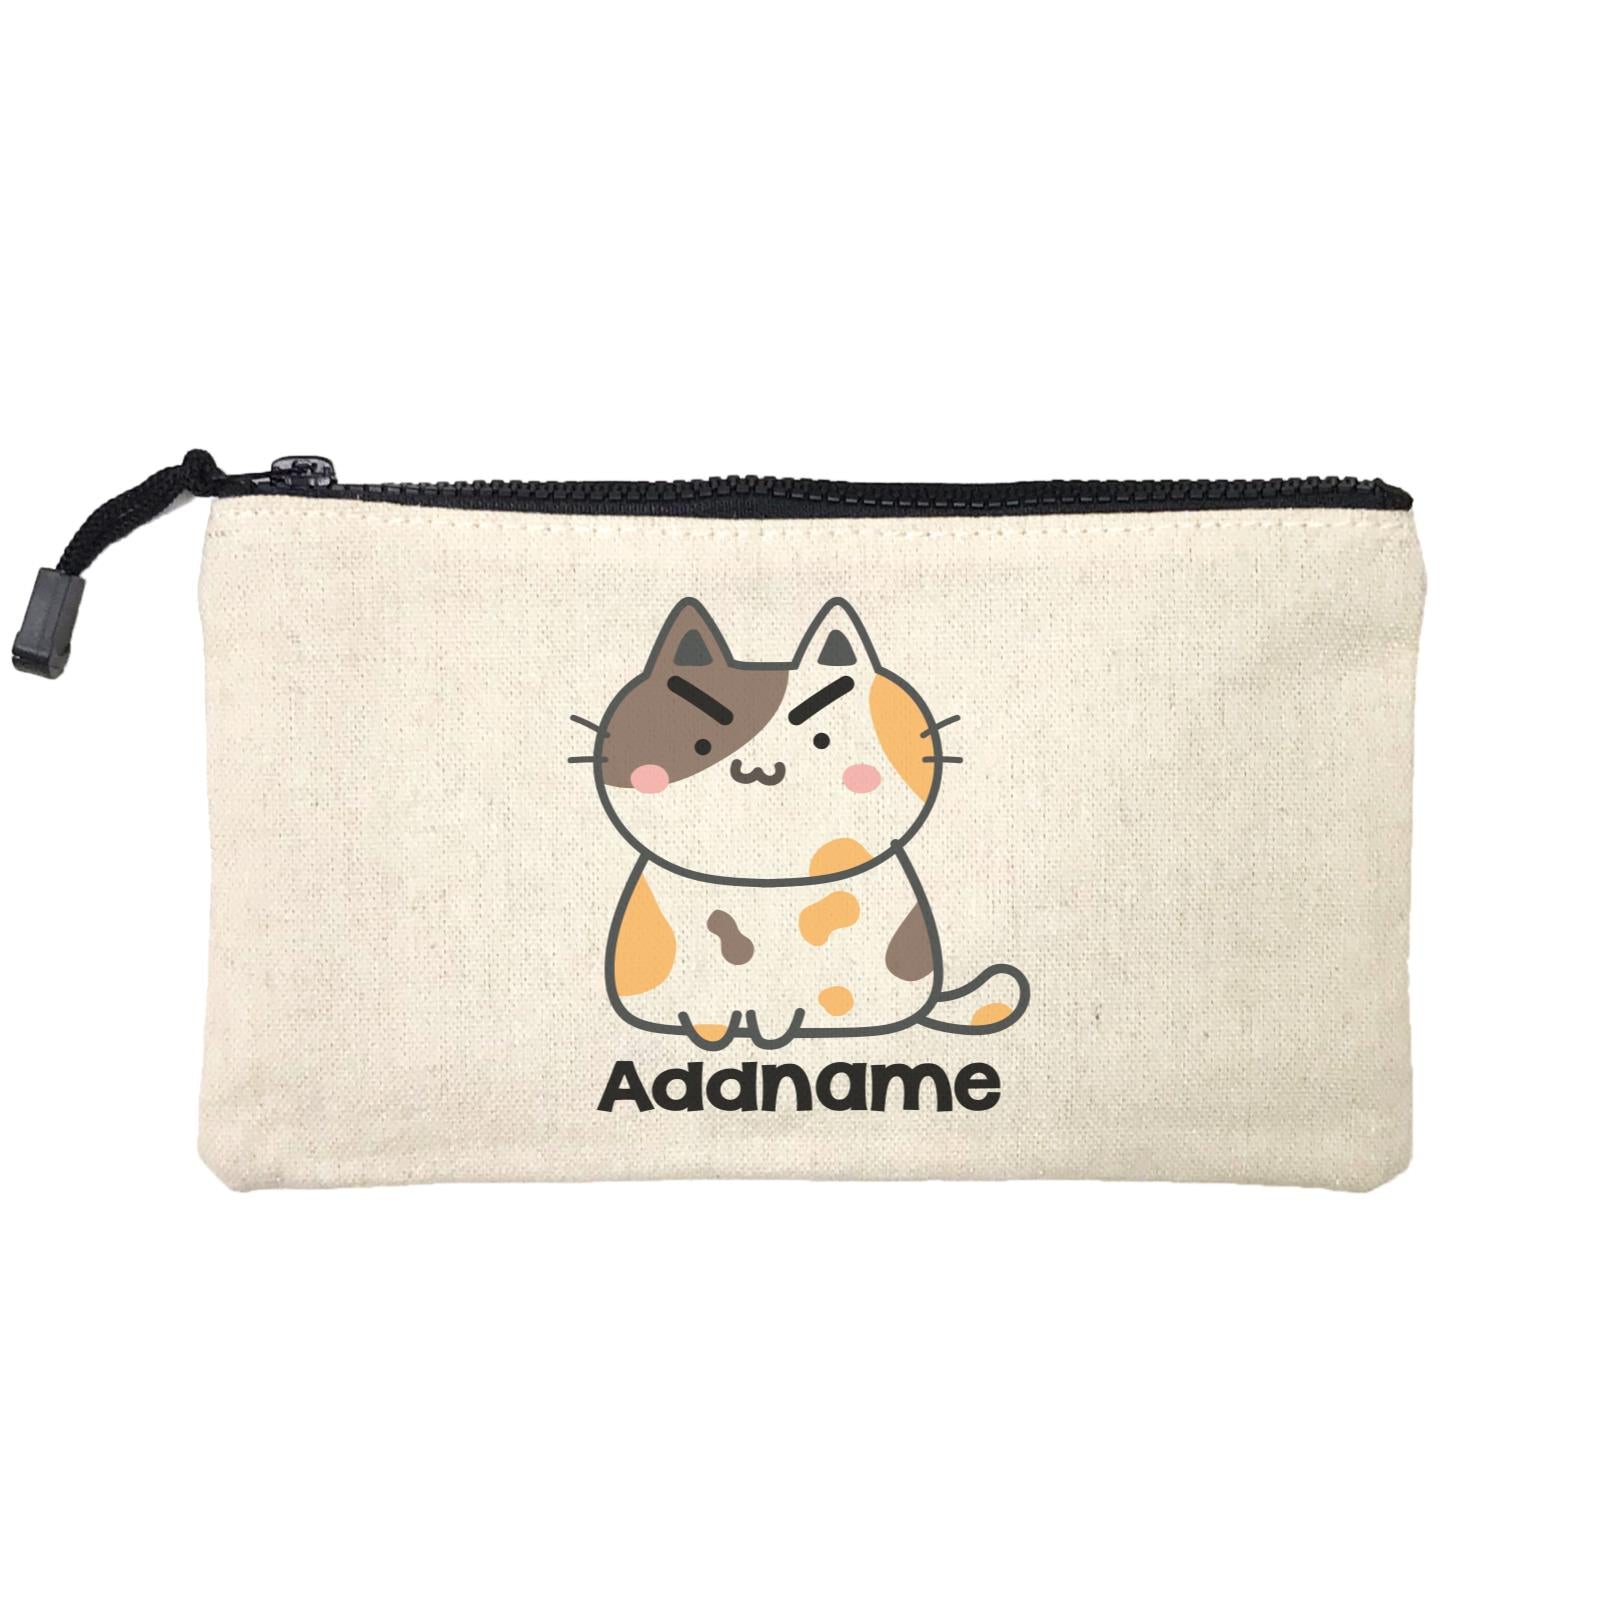 Drawn Adorable Cats Angry Cat Addname Mini Accessories Stationery Pouch